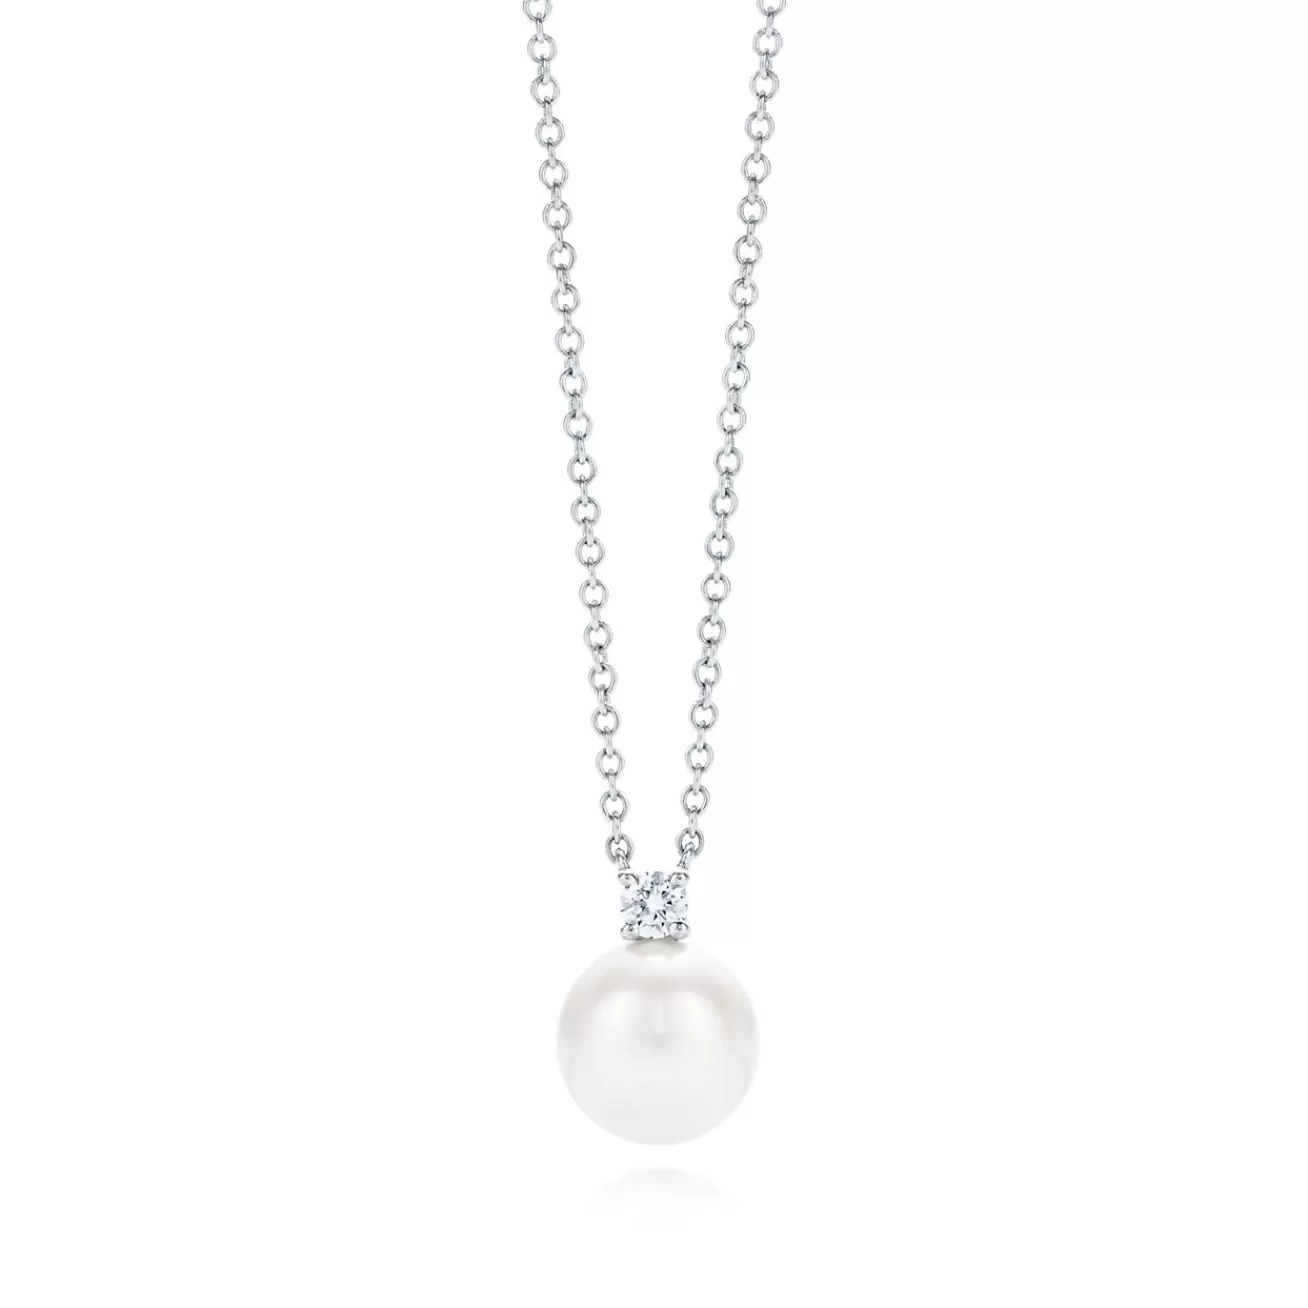 Tiffany & Co. Tiffany Signature® Pearls pendant in 18k white gold with a pearl and a diamond. | ^ Necklaces & Pendants | Diamond Jewelry